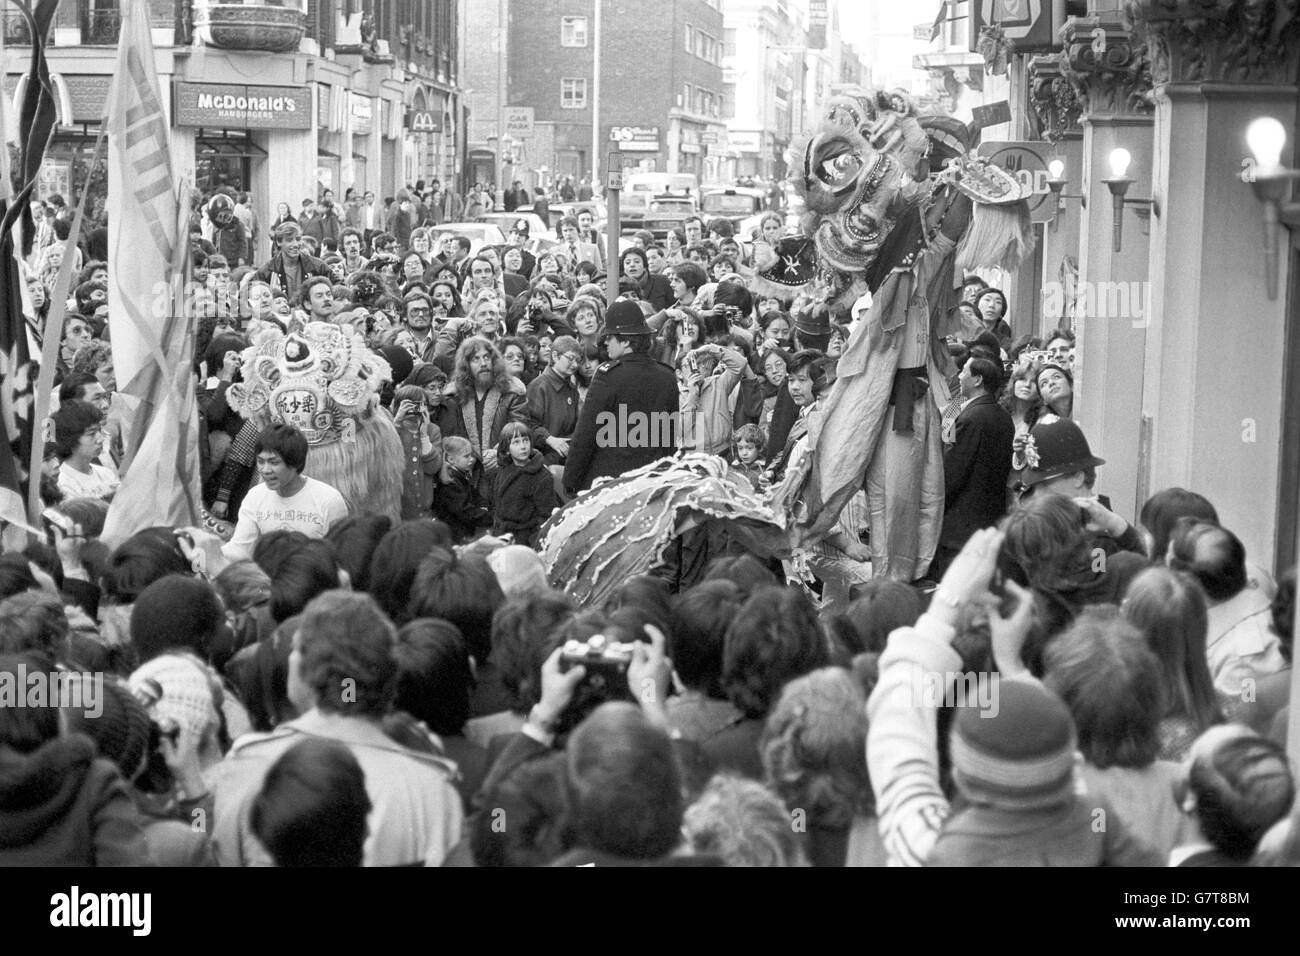 A traditional dragon rears over the crowd in Gerrard Street, Soho, as London welcomes in the Chinese Year of the Monkey. Stock Photo